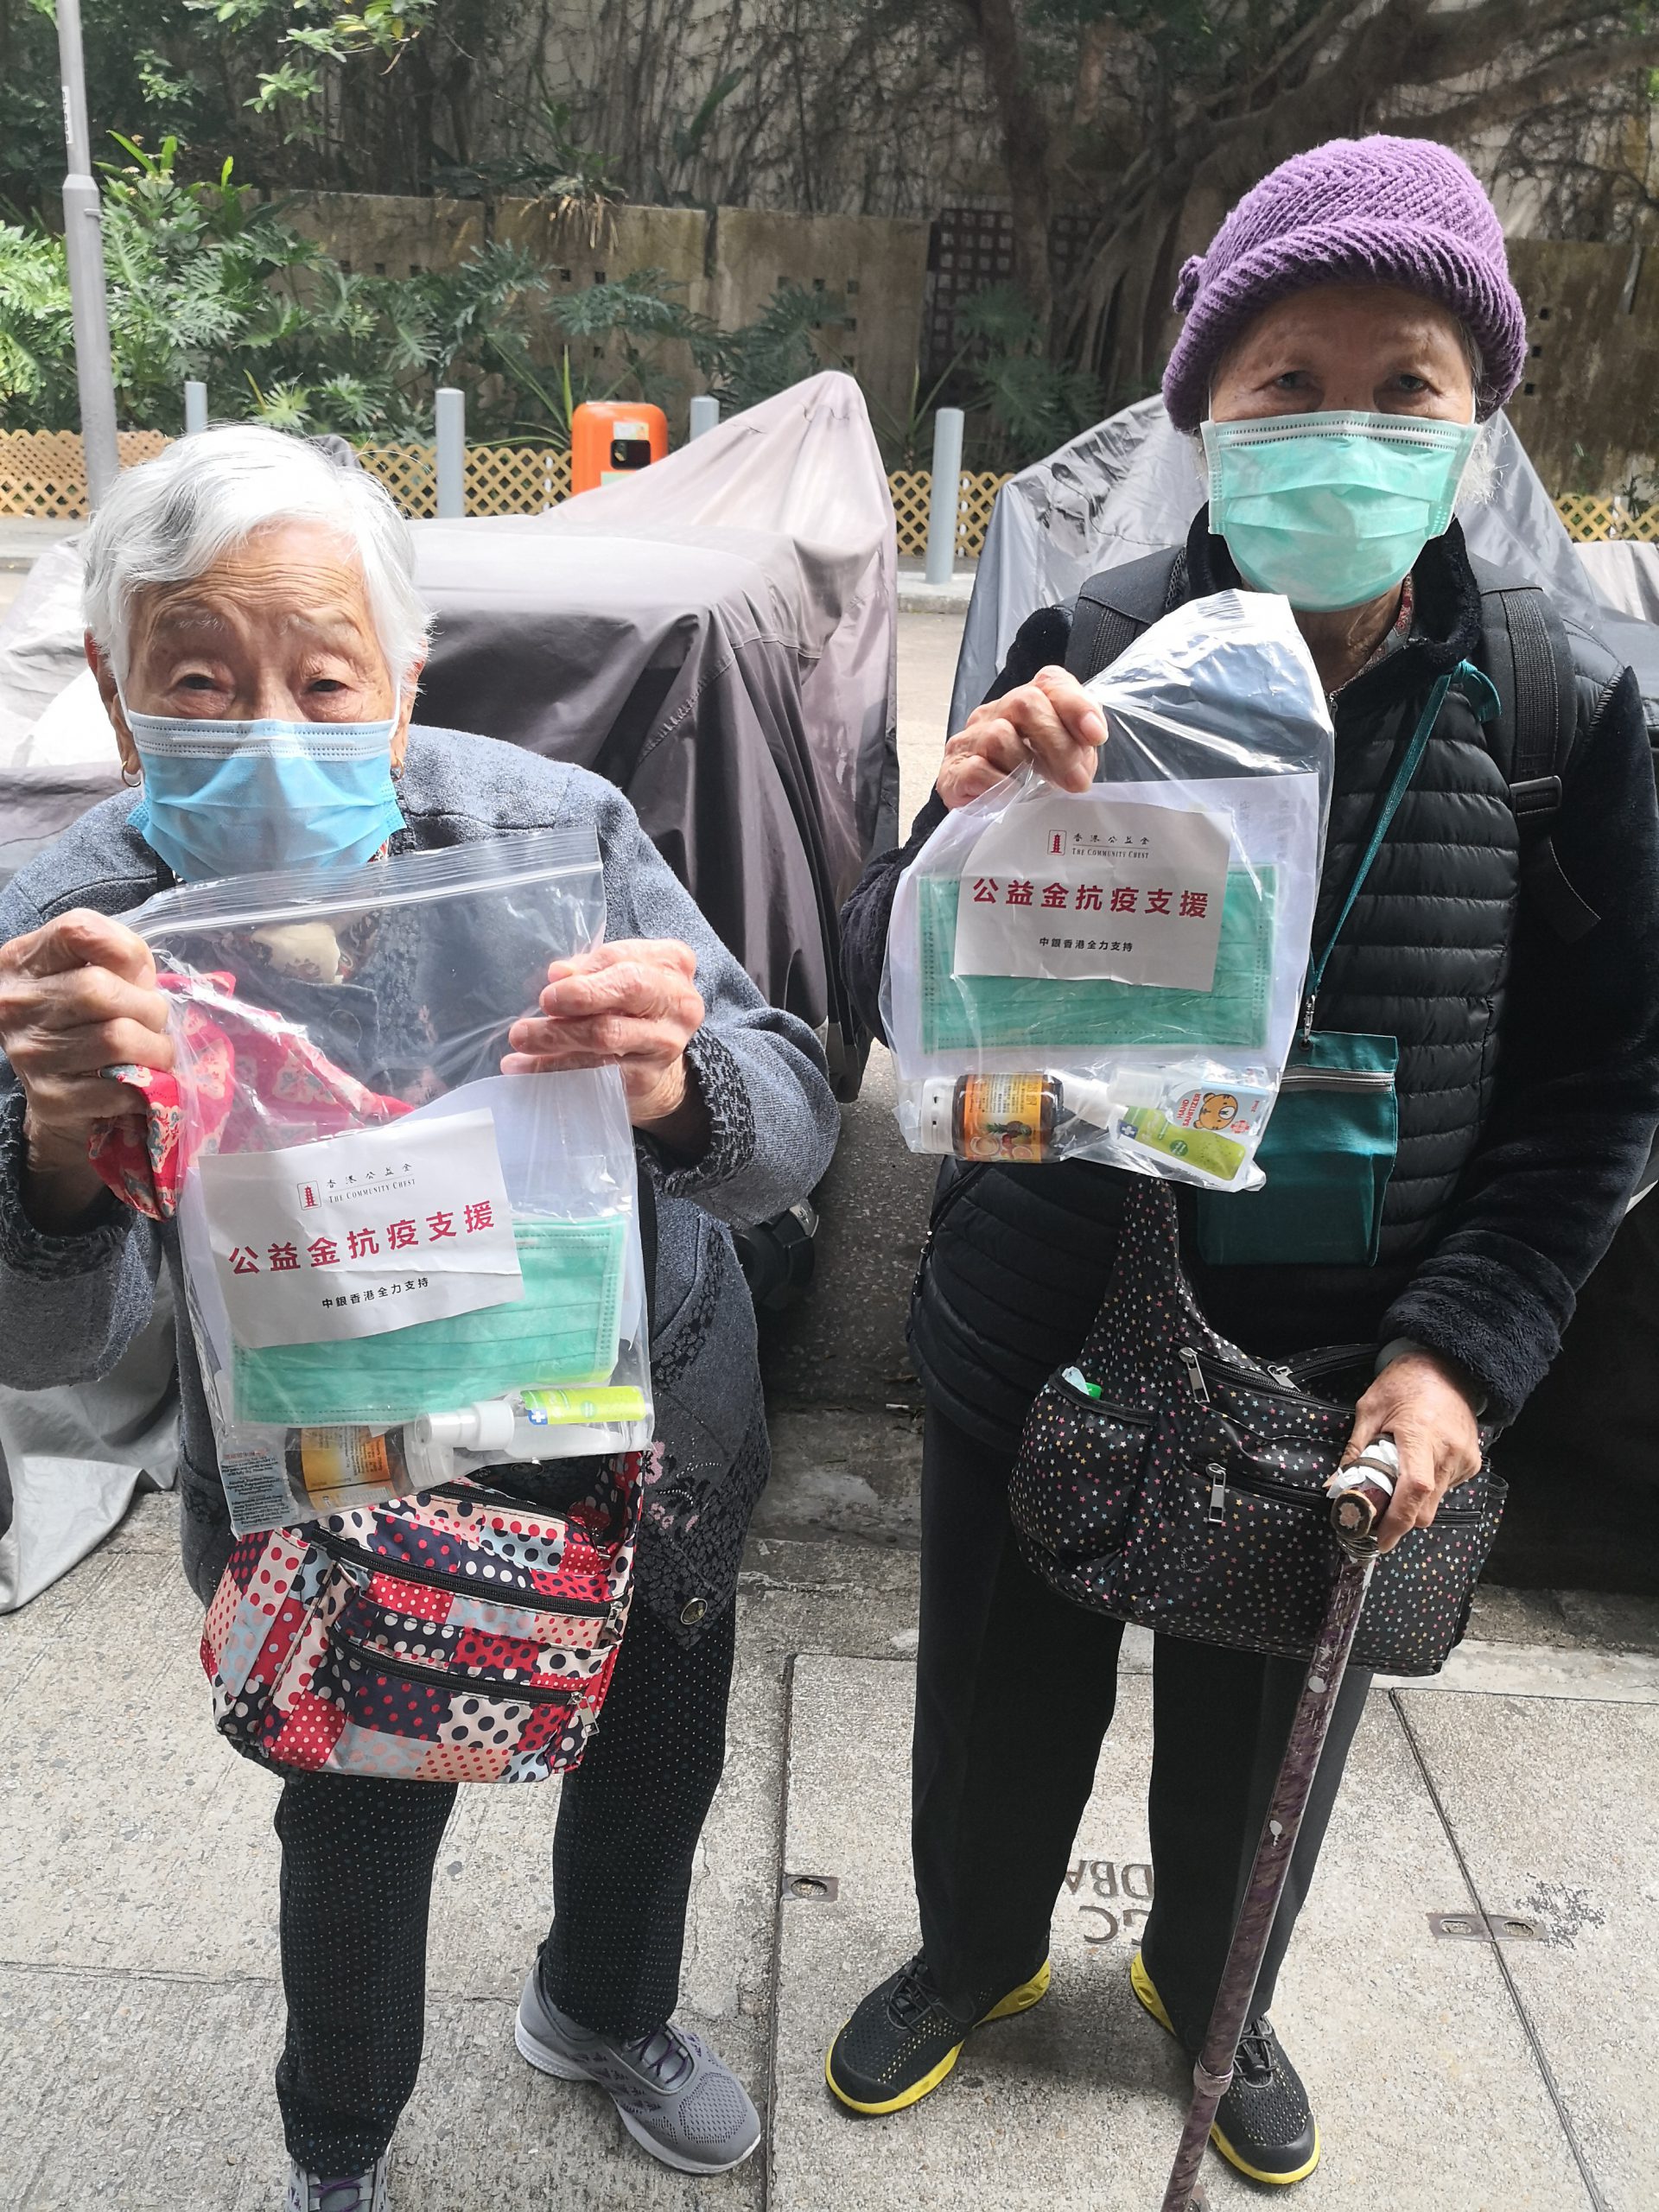 Giving face masks and health kits to needy